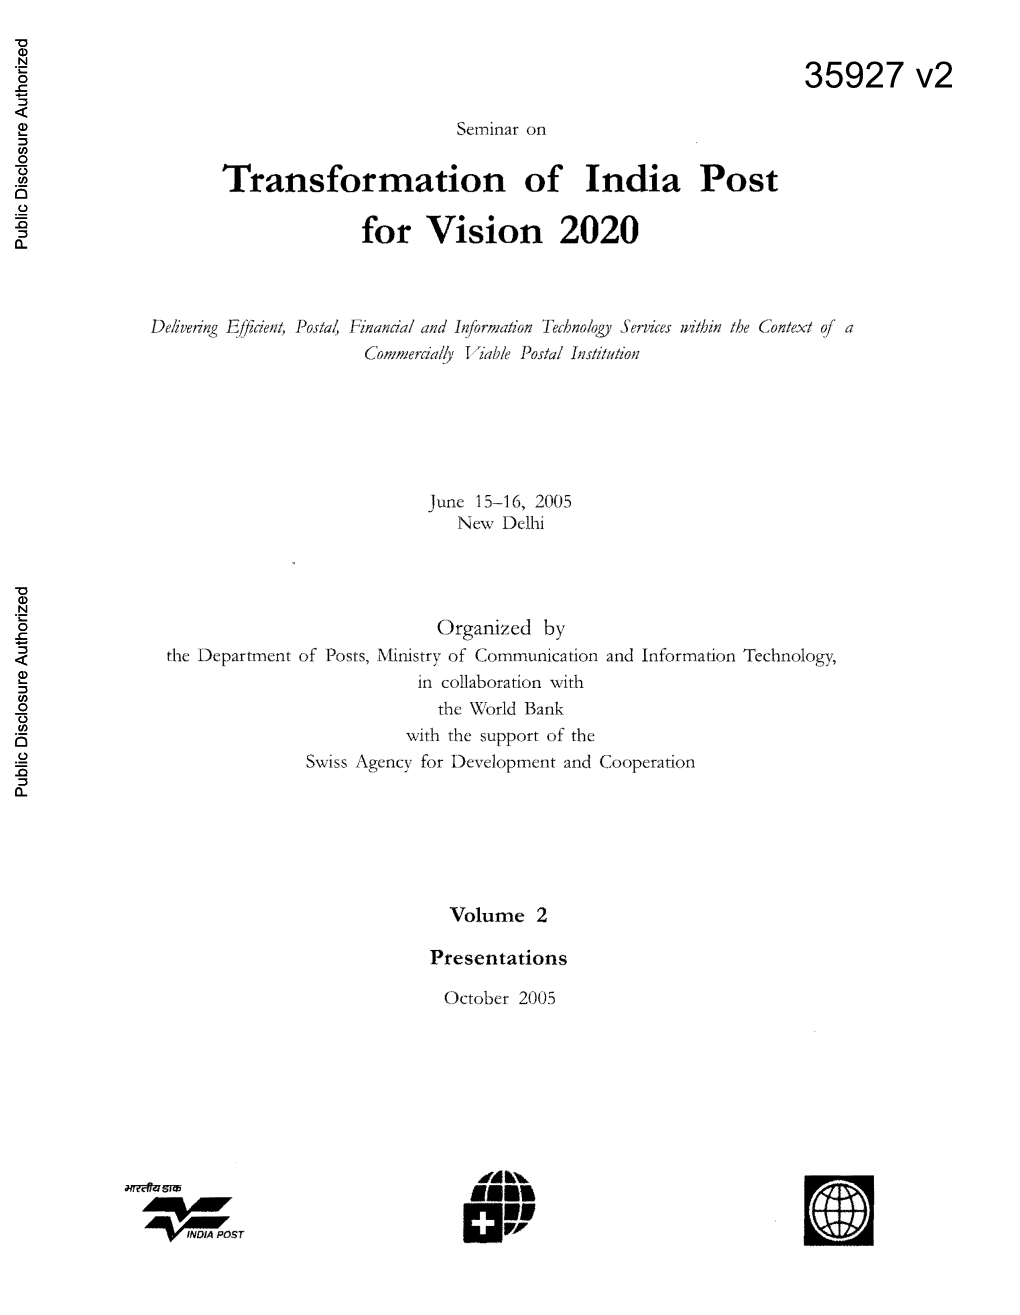 Transformation of India Post for Vision 2020